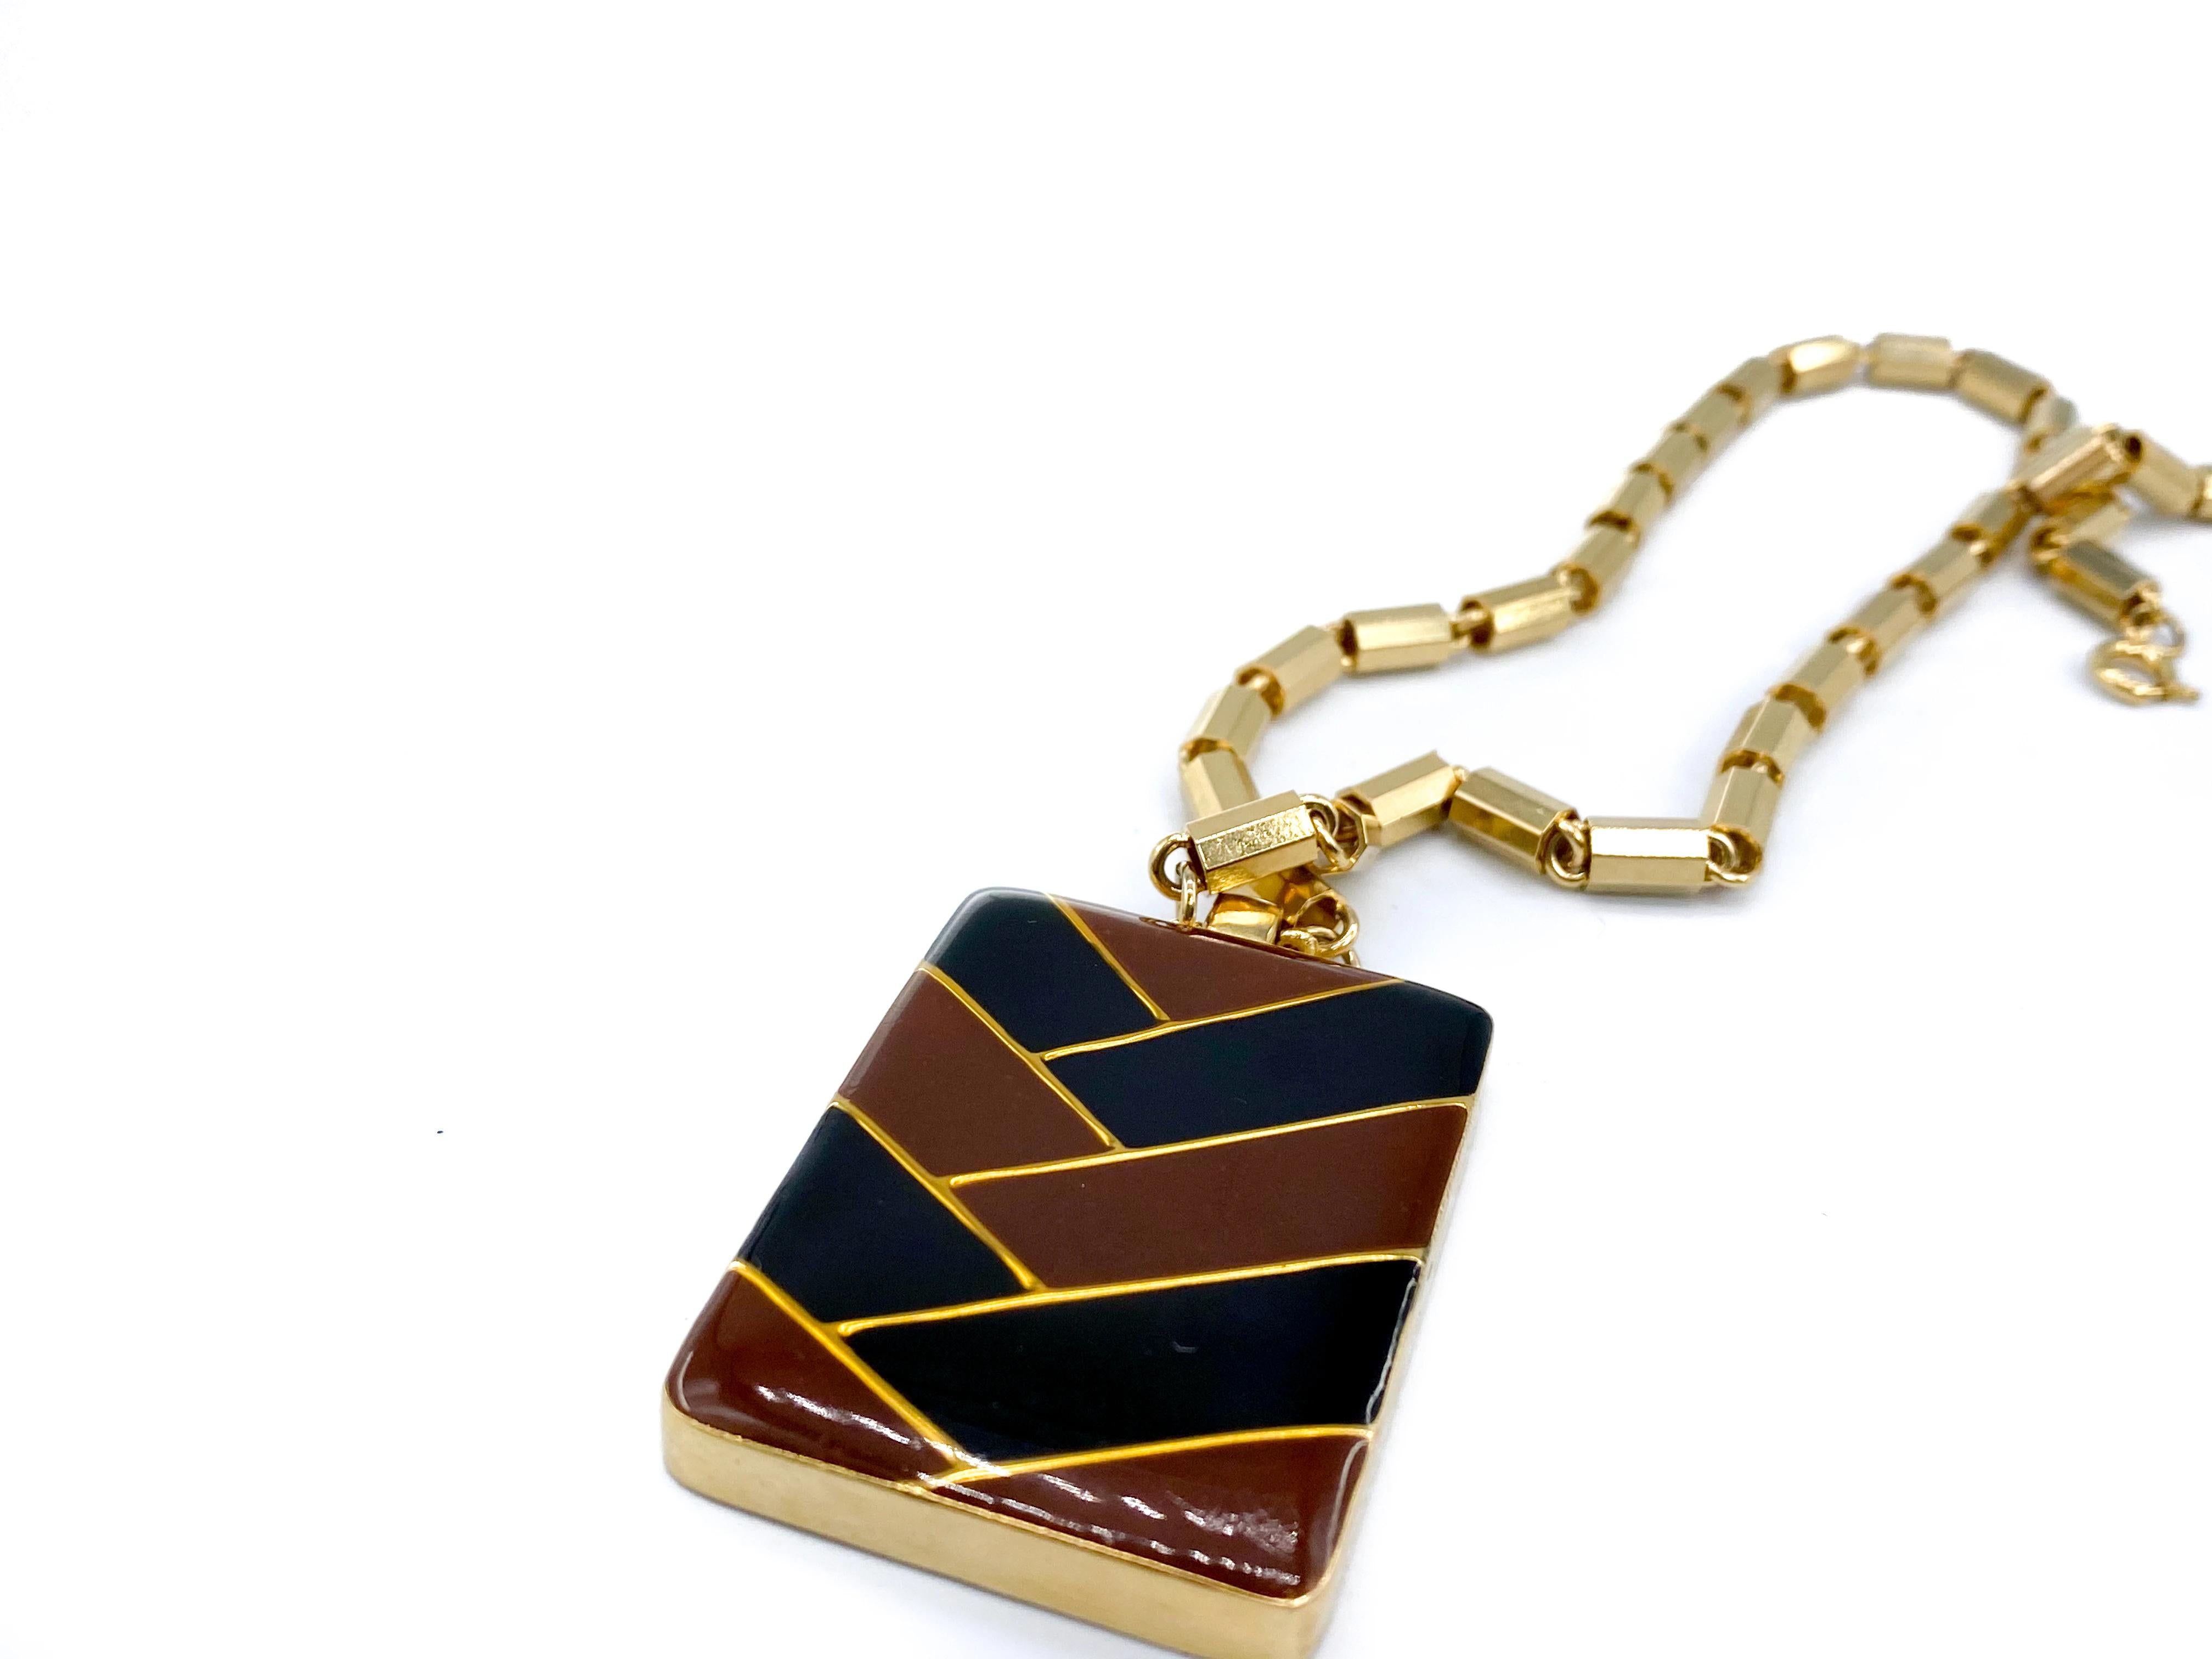 Lanvin 1970s Vintage Pendant Necklace.

Fully authenticated and in excellent condition.

Length - 17